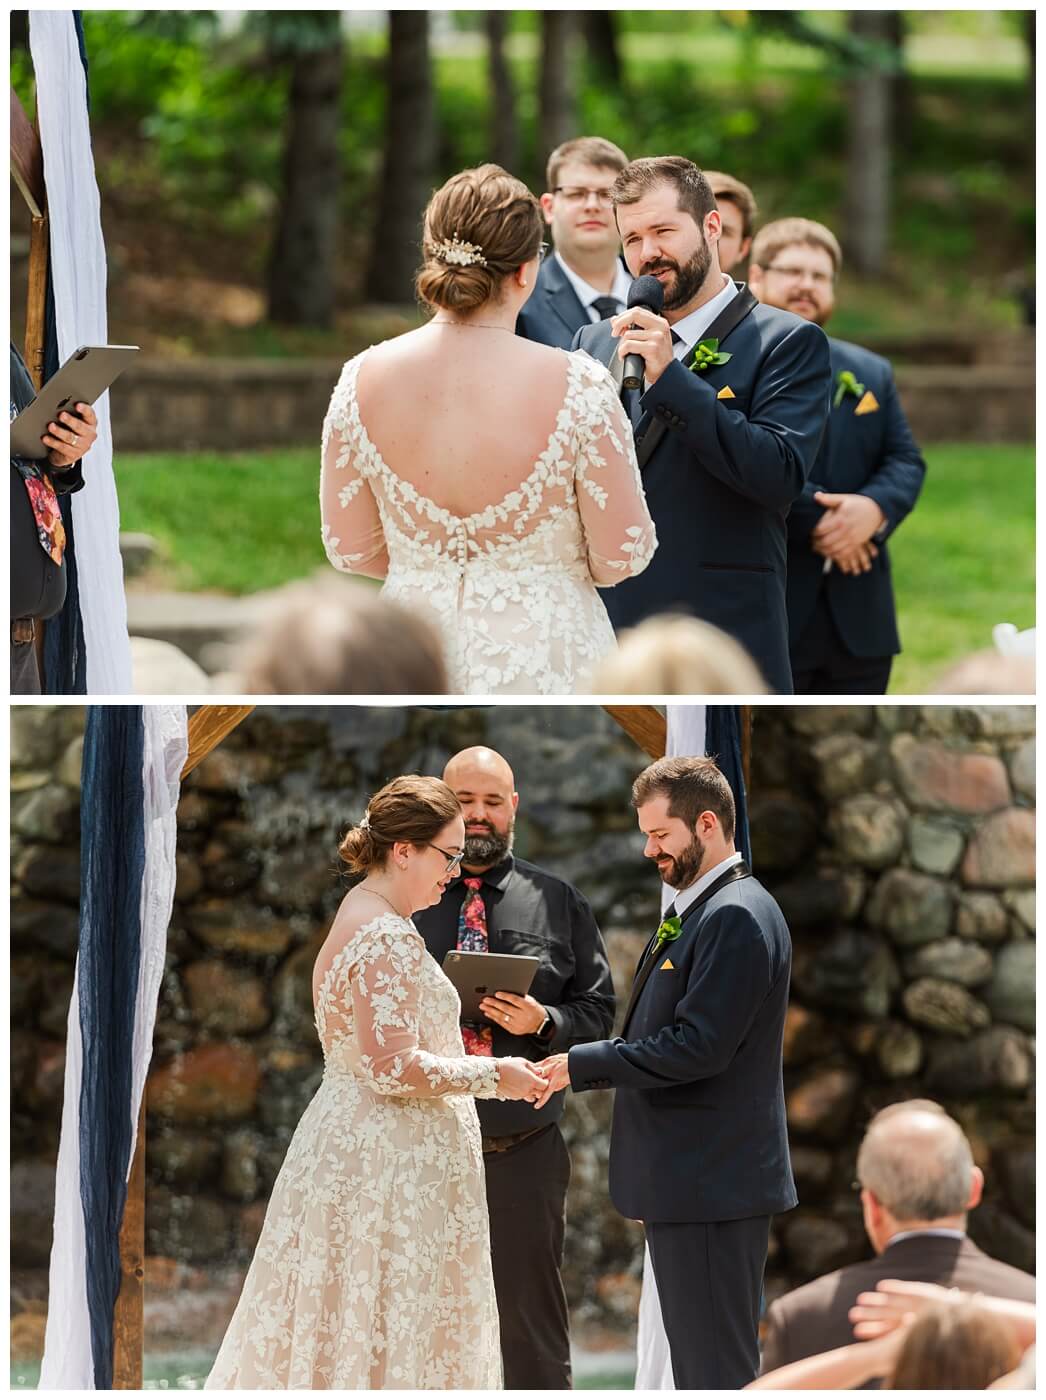 Jared & Haley - 15 - Bride and Groom exchanging vows and rings